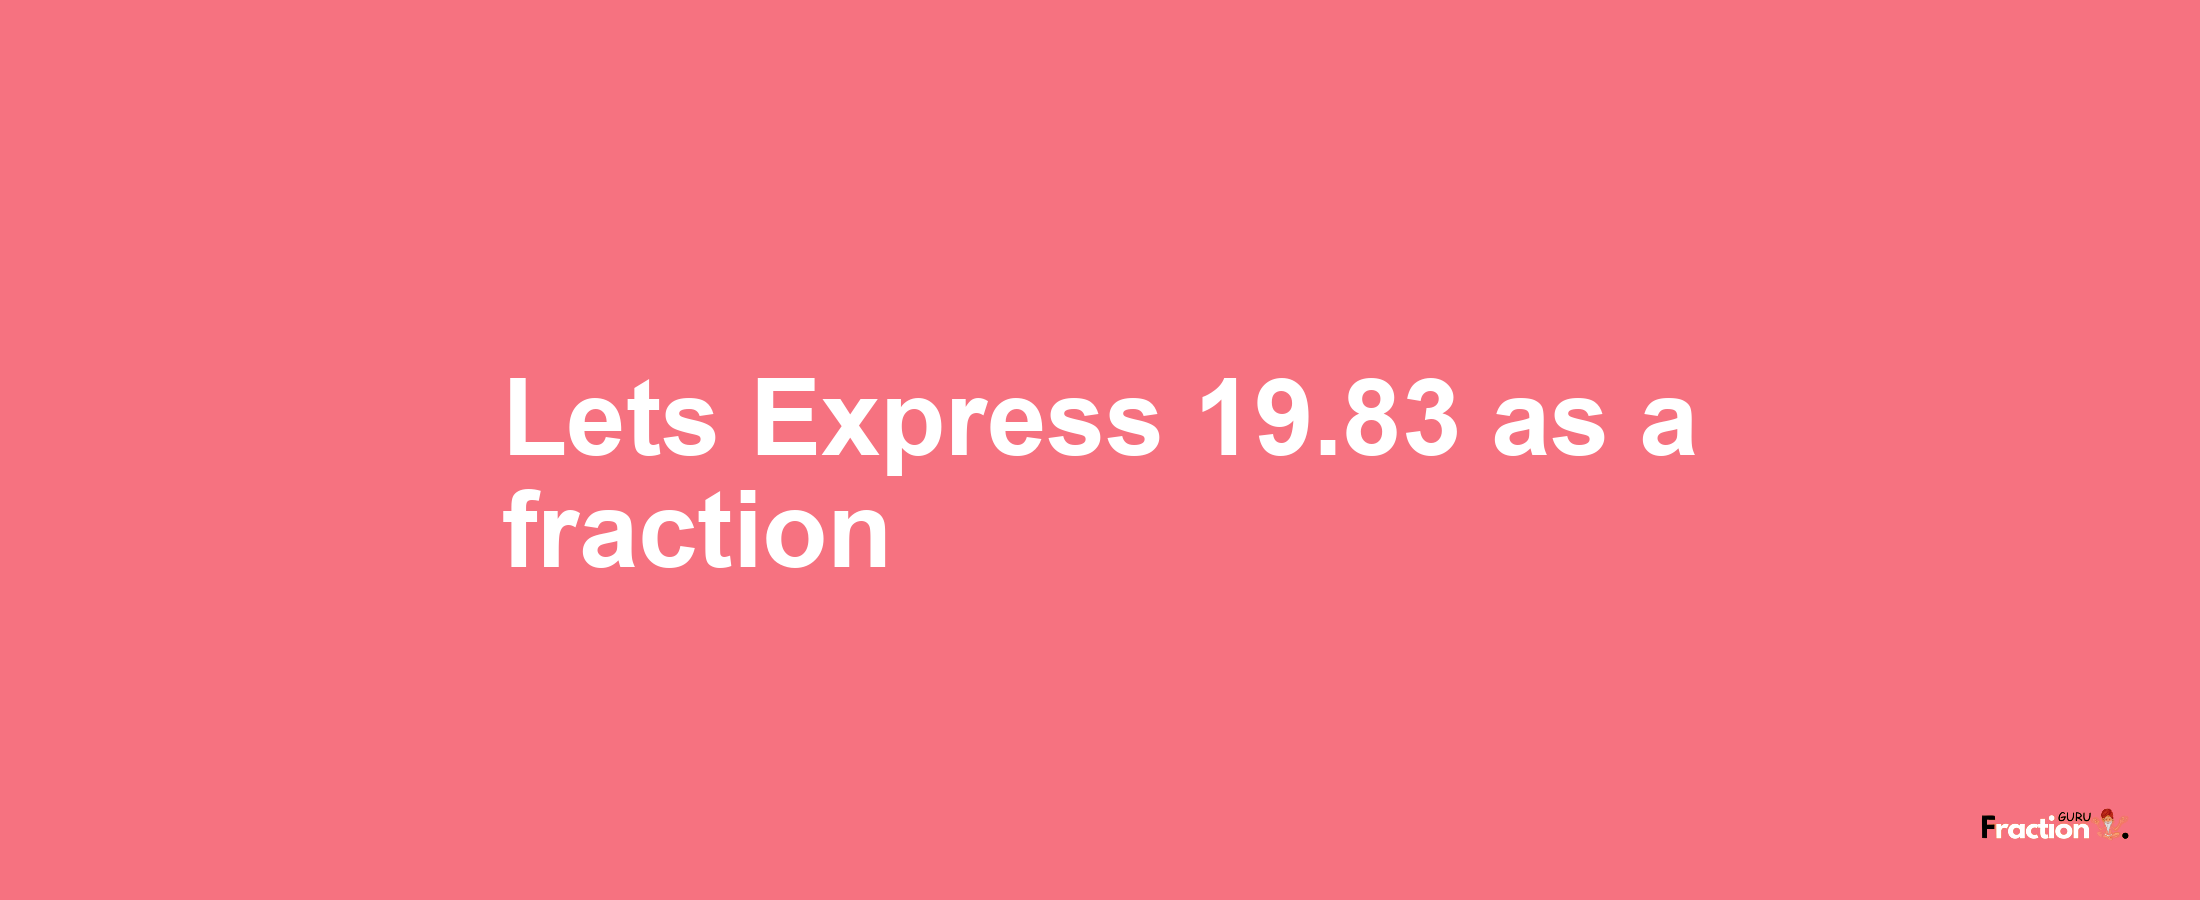 Lets Express 19.83 as afraction